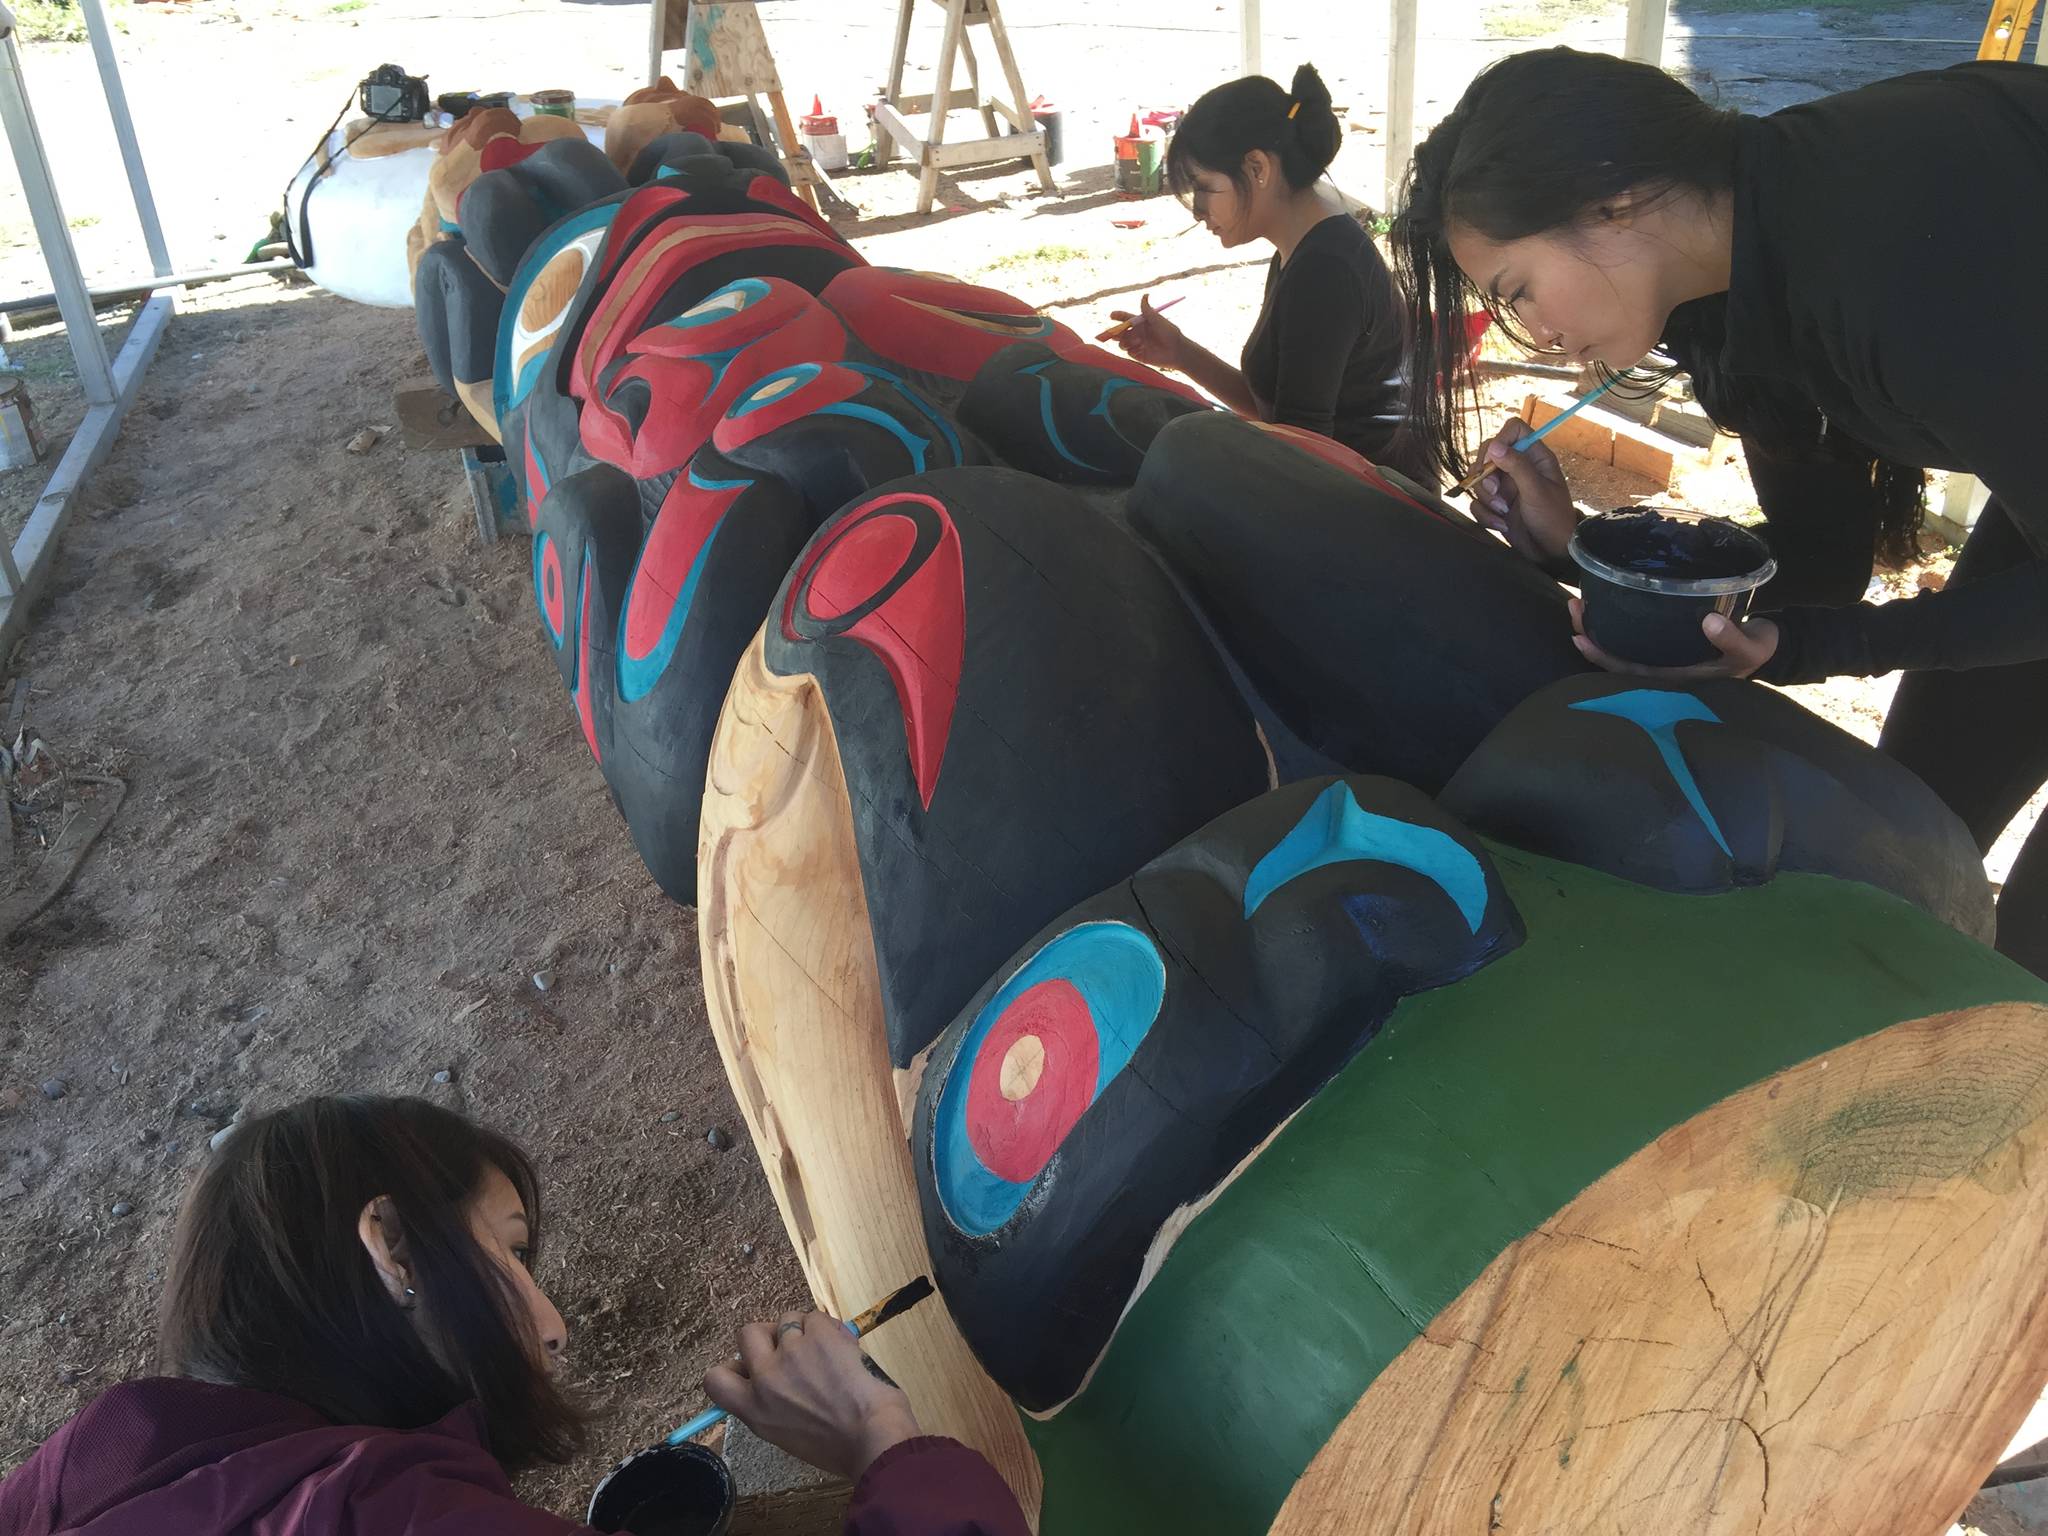 Contributed photo
House of Tears Carvers painting the Anthropocene Pole in 2018.